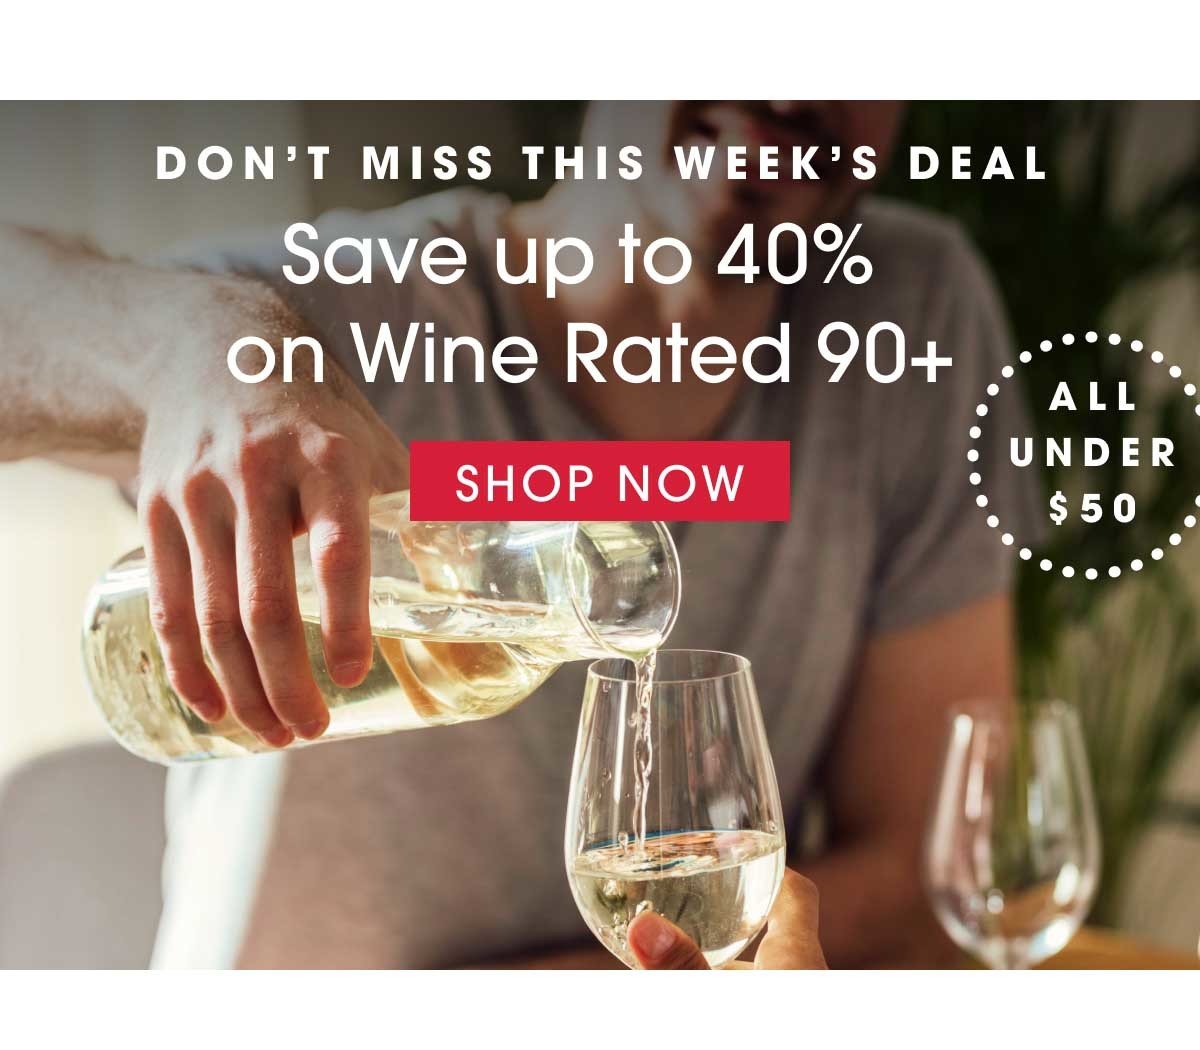 Don't Miss this Week's Savings: Save up to 40% on Wines Rated 90+ under $50